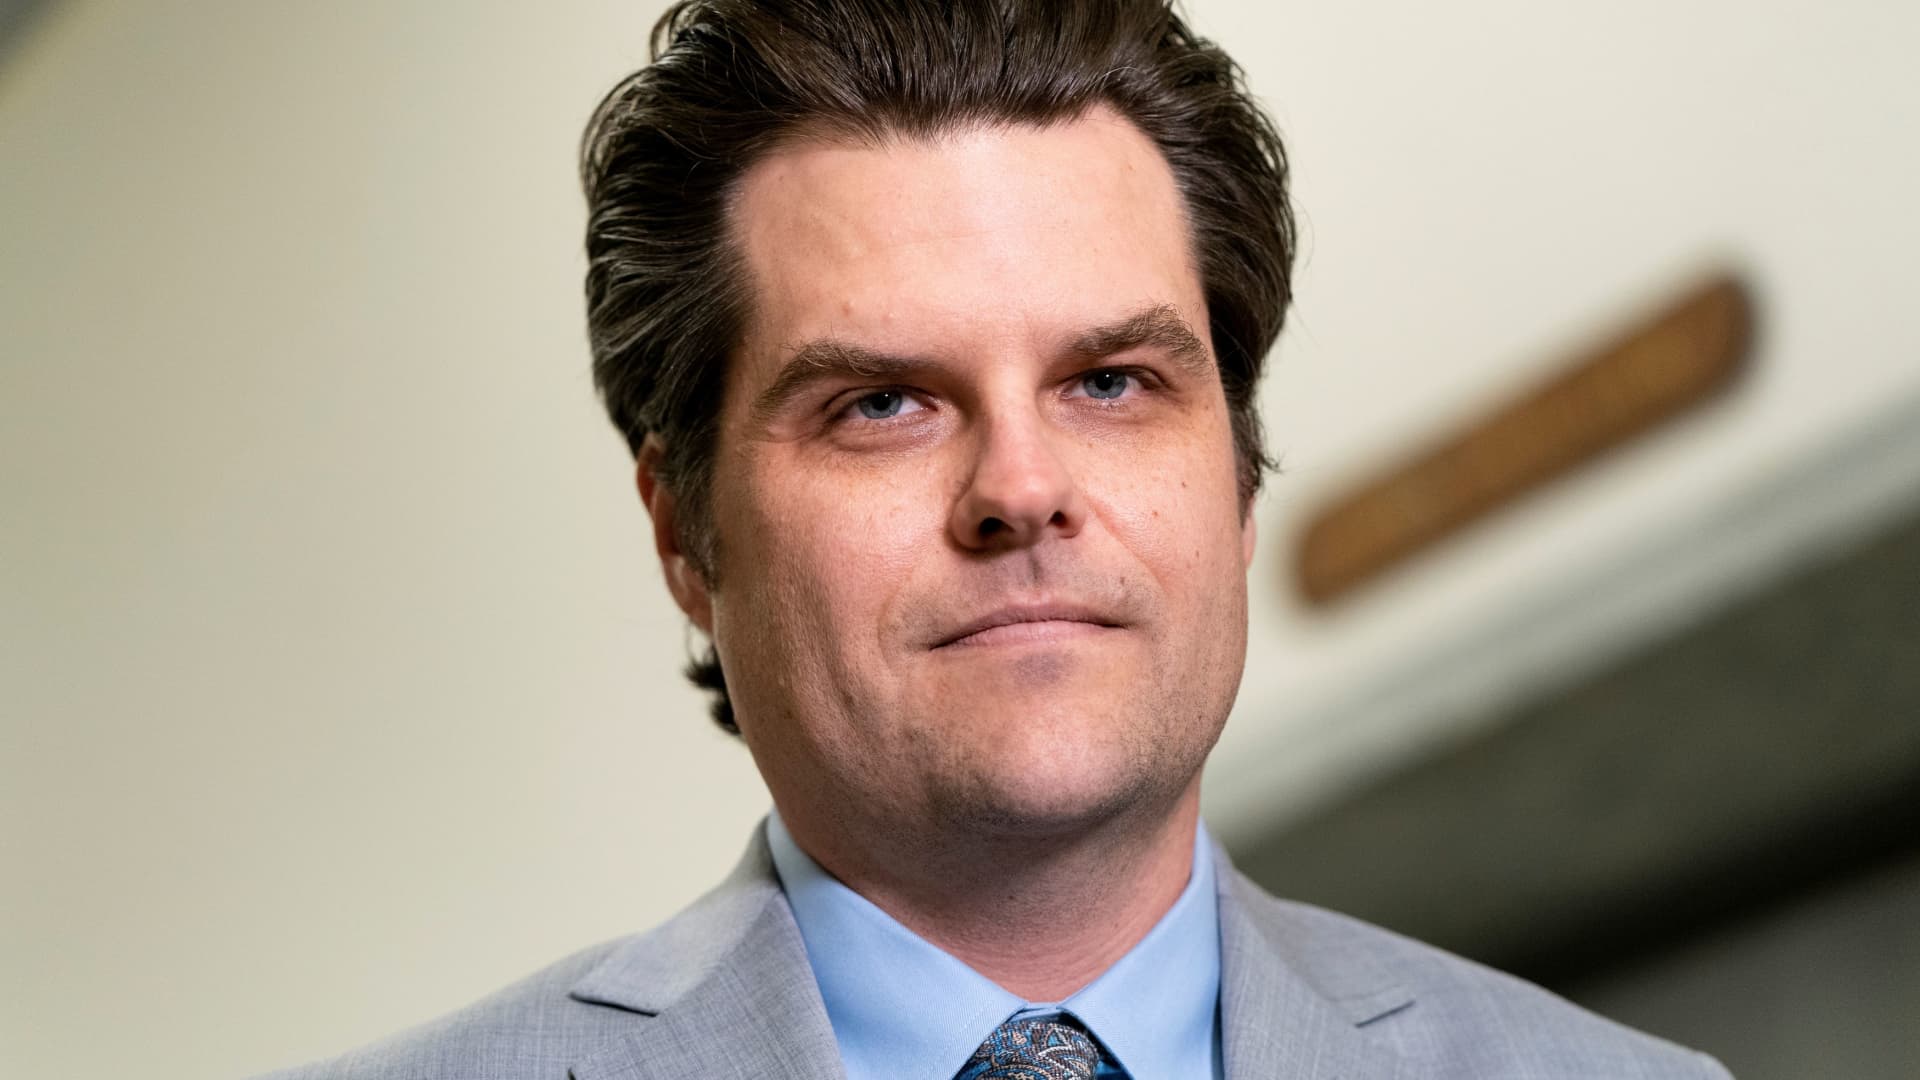 U.S. Rep. Matt Gaetz (R-FL) looks on as he speaks to the media while former White House counsel Don McGahn appears before the House Judiciary Committee on Capitol Hill in Washington, June 4, 2021.